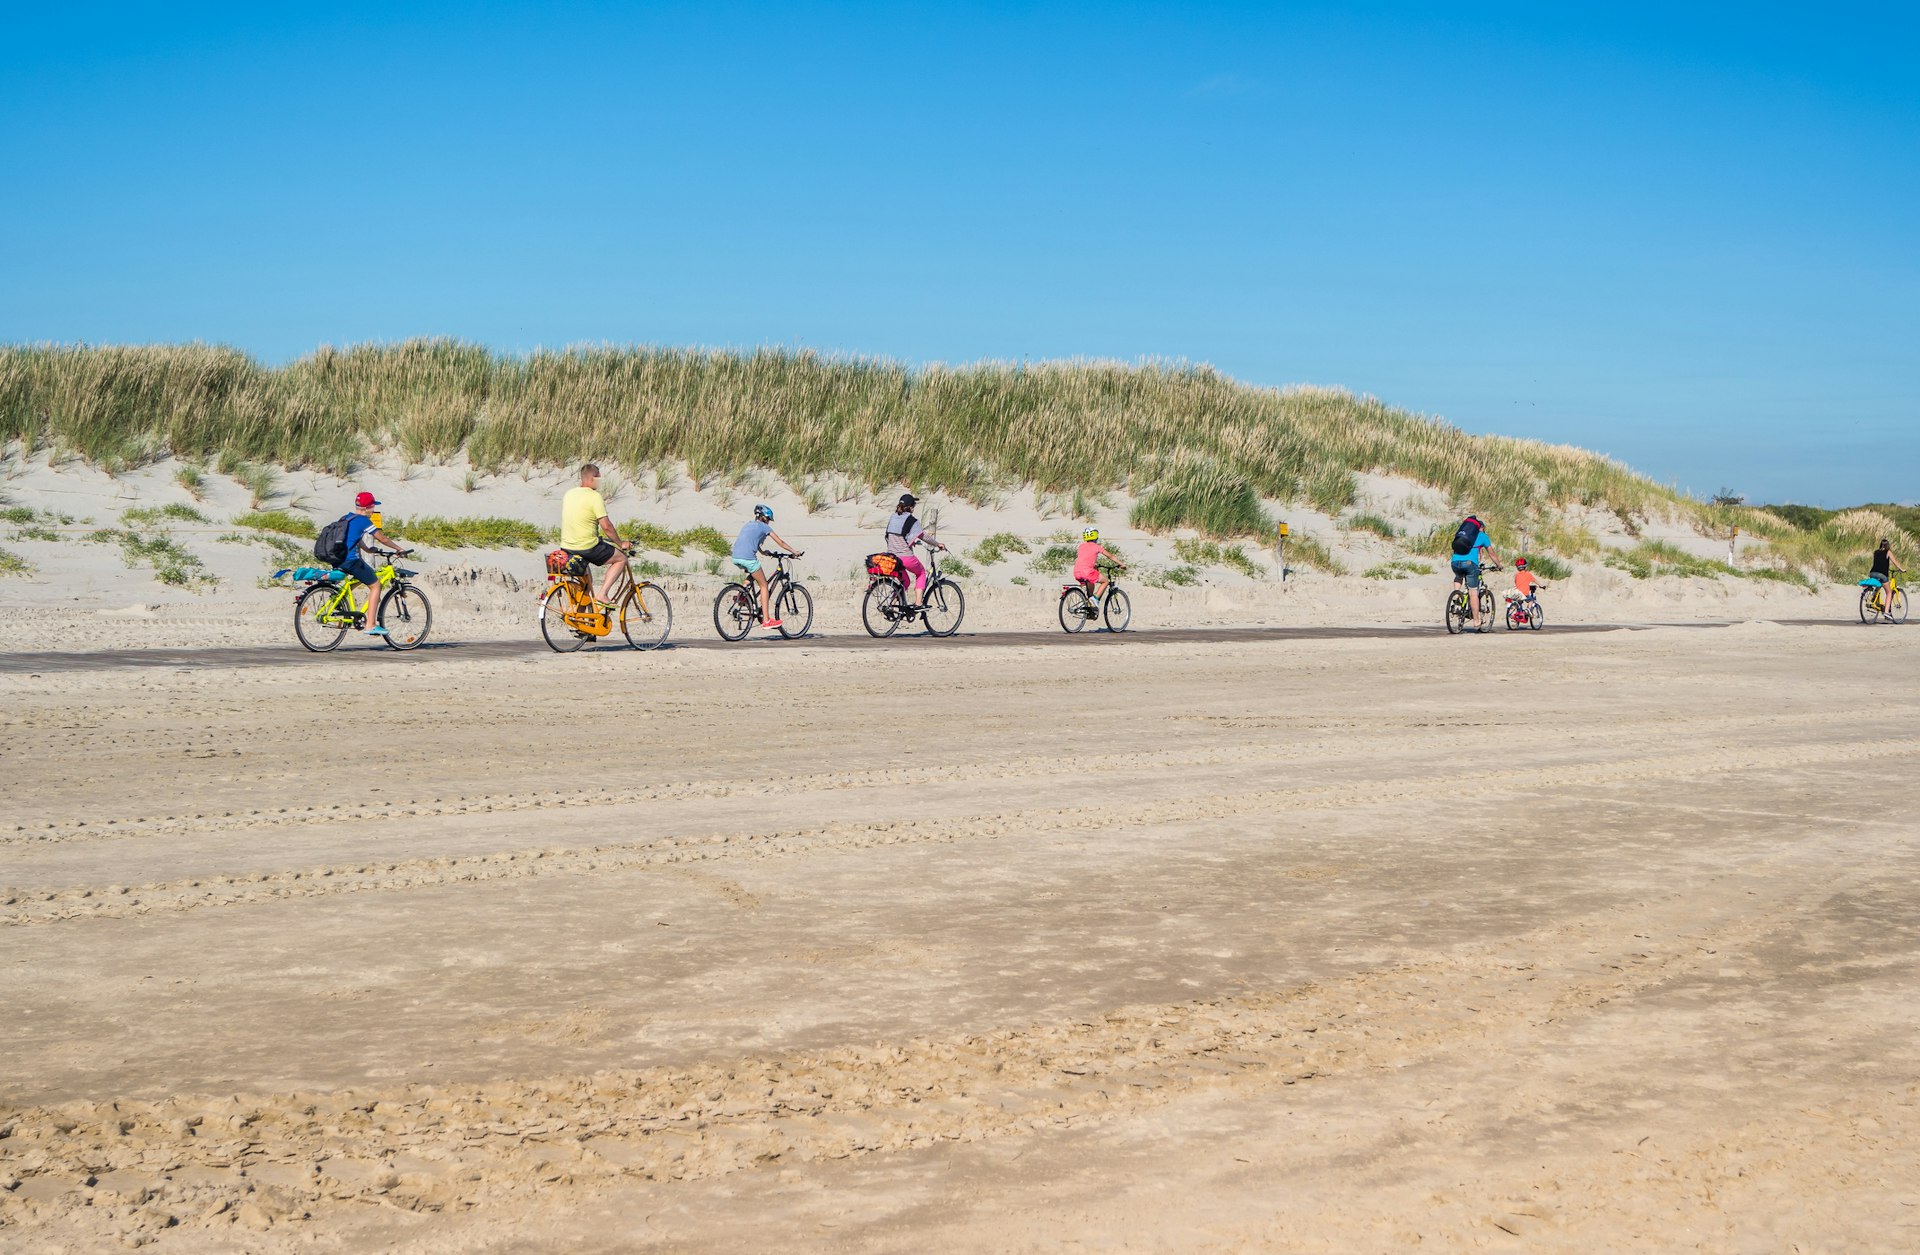 A line of cyclists of all ages follow a bike path along a wide sandy beach